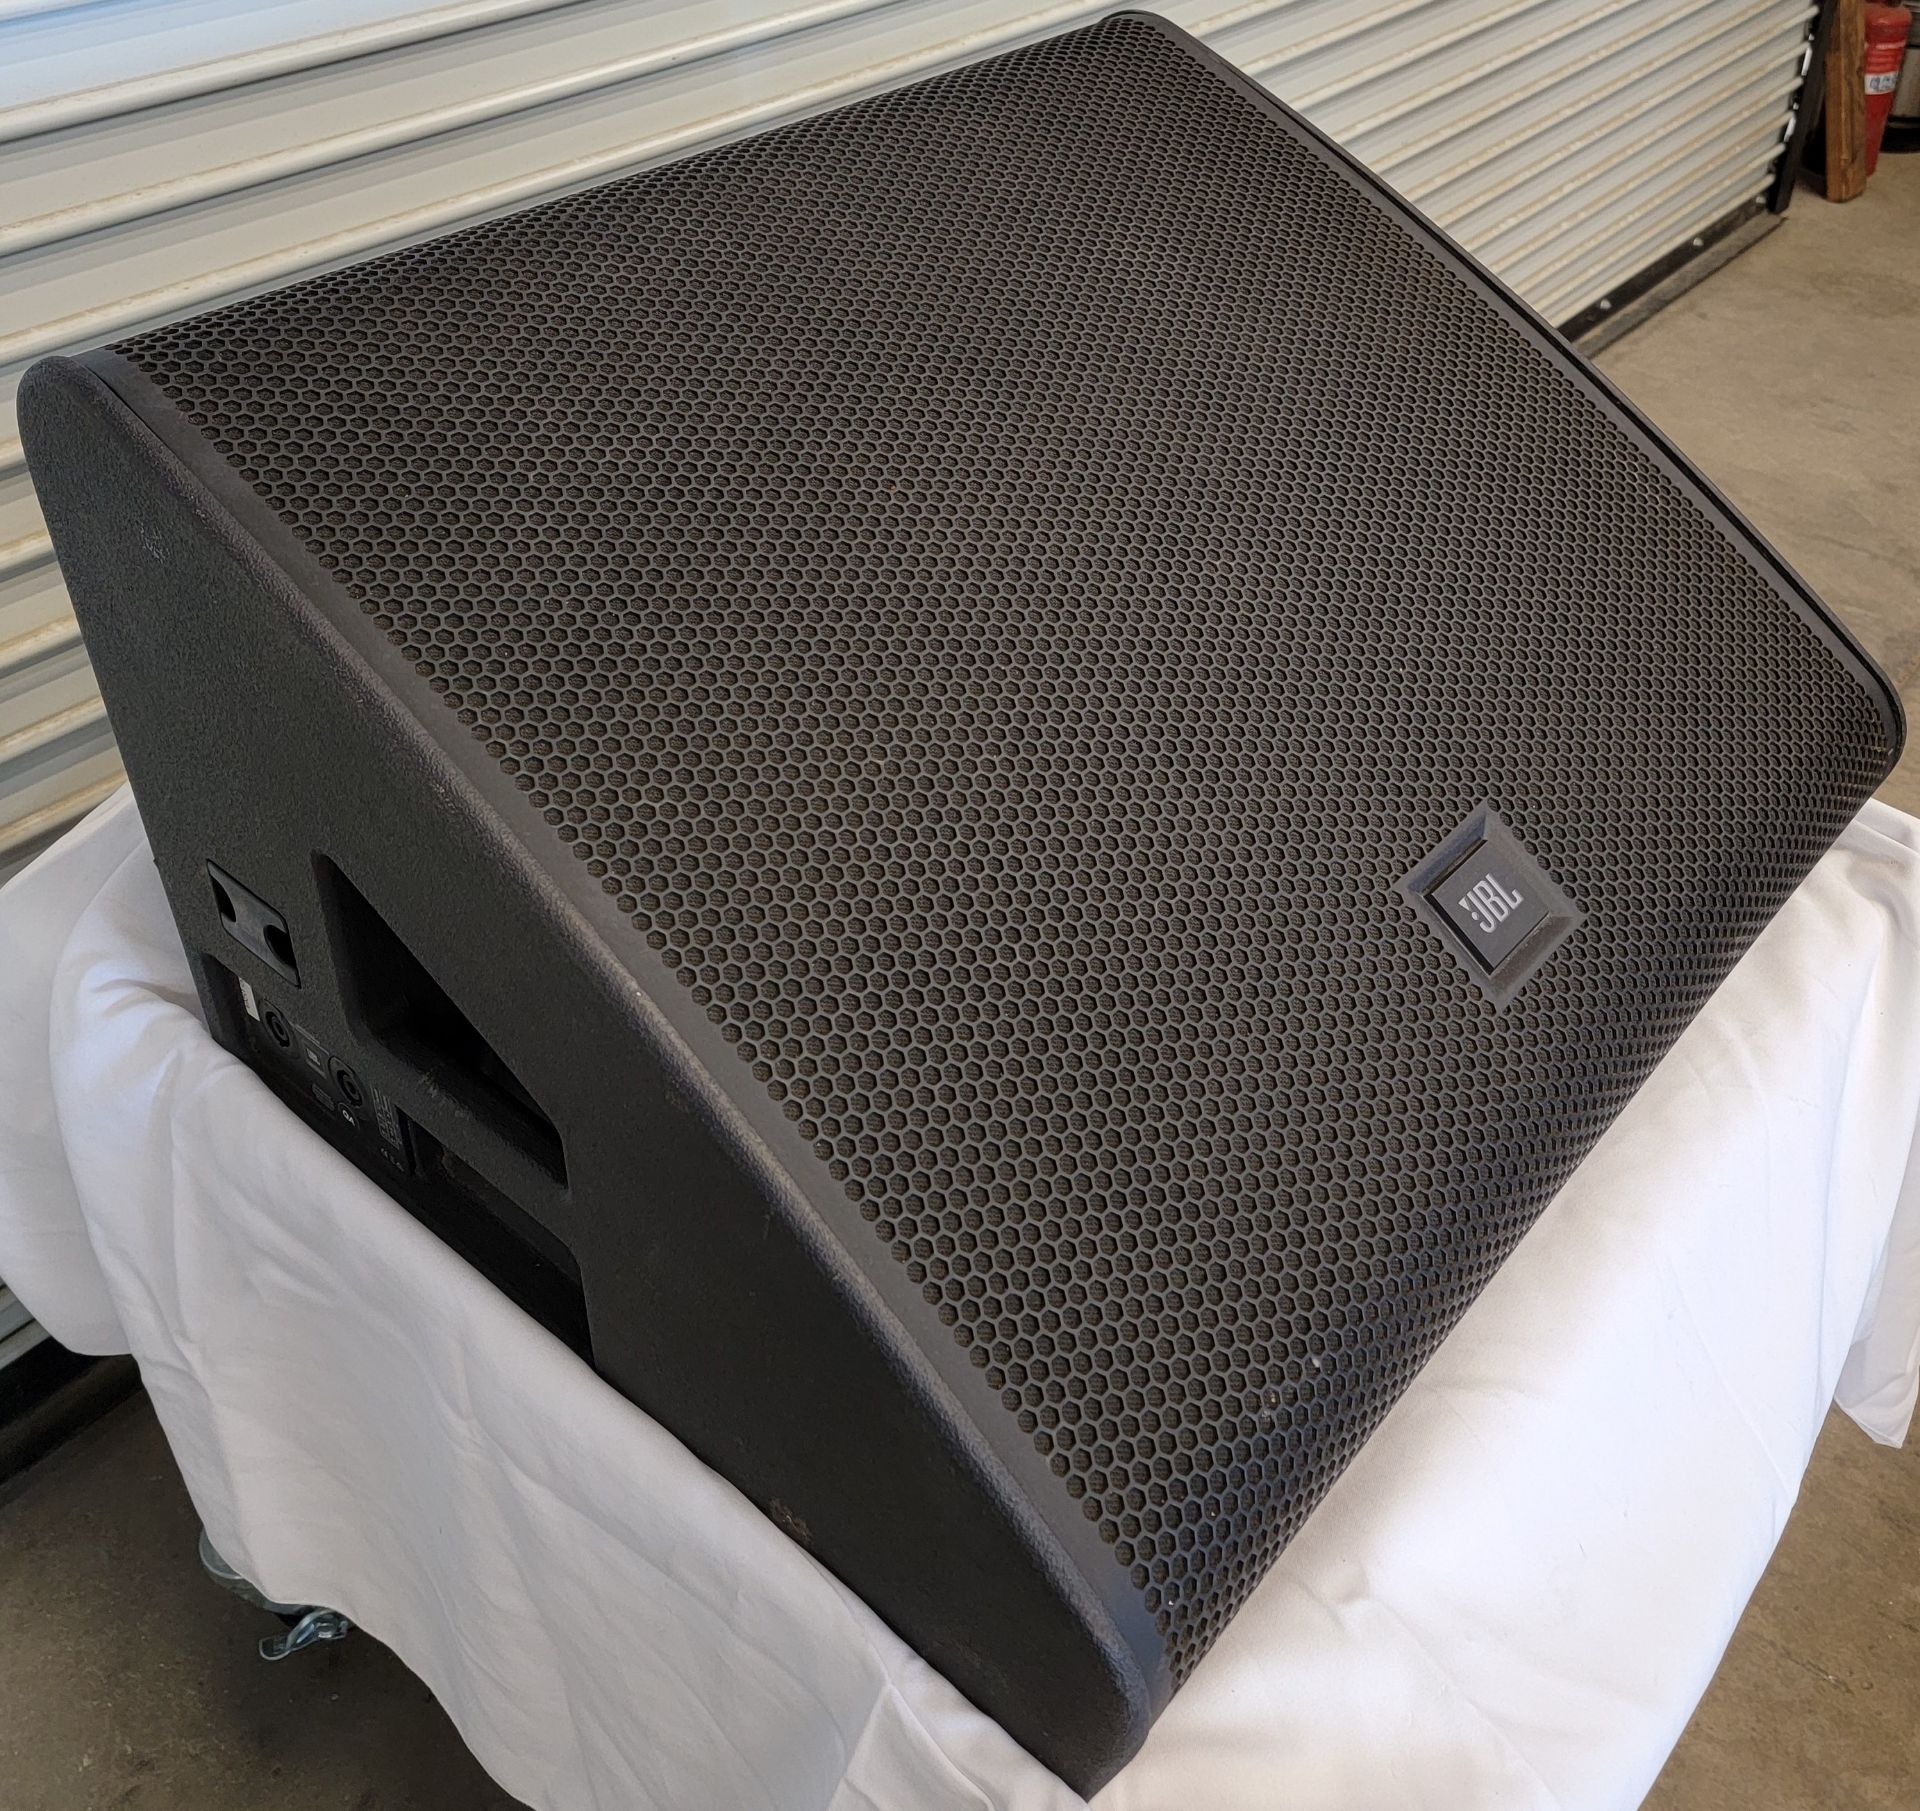 JBL premium stage monitoring products - Image 2 of 5